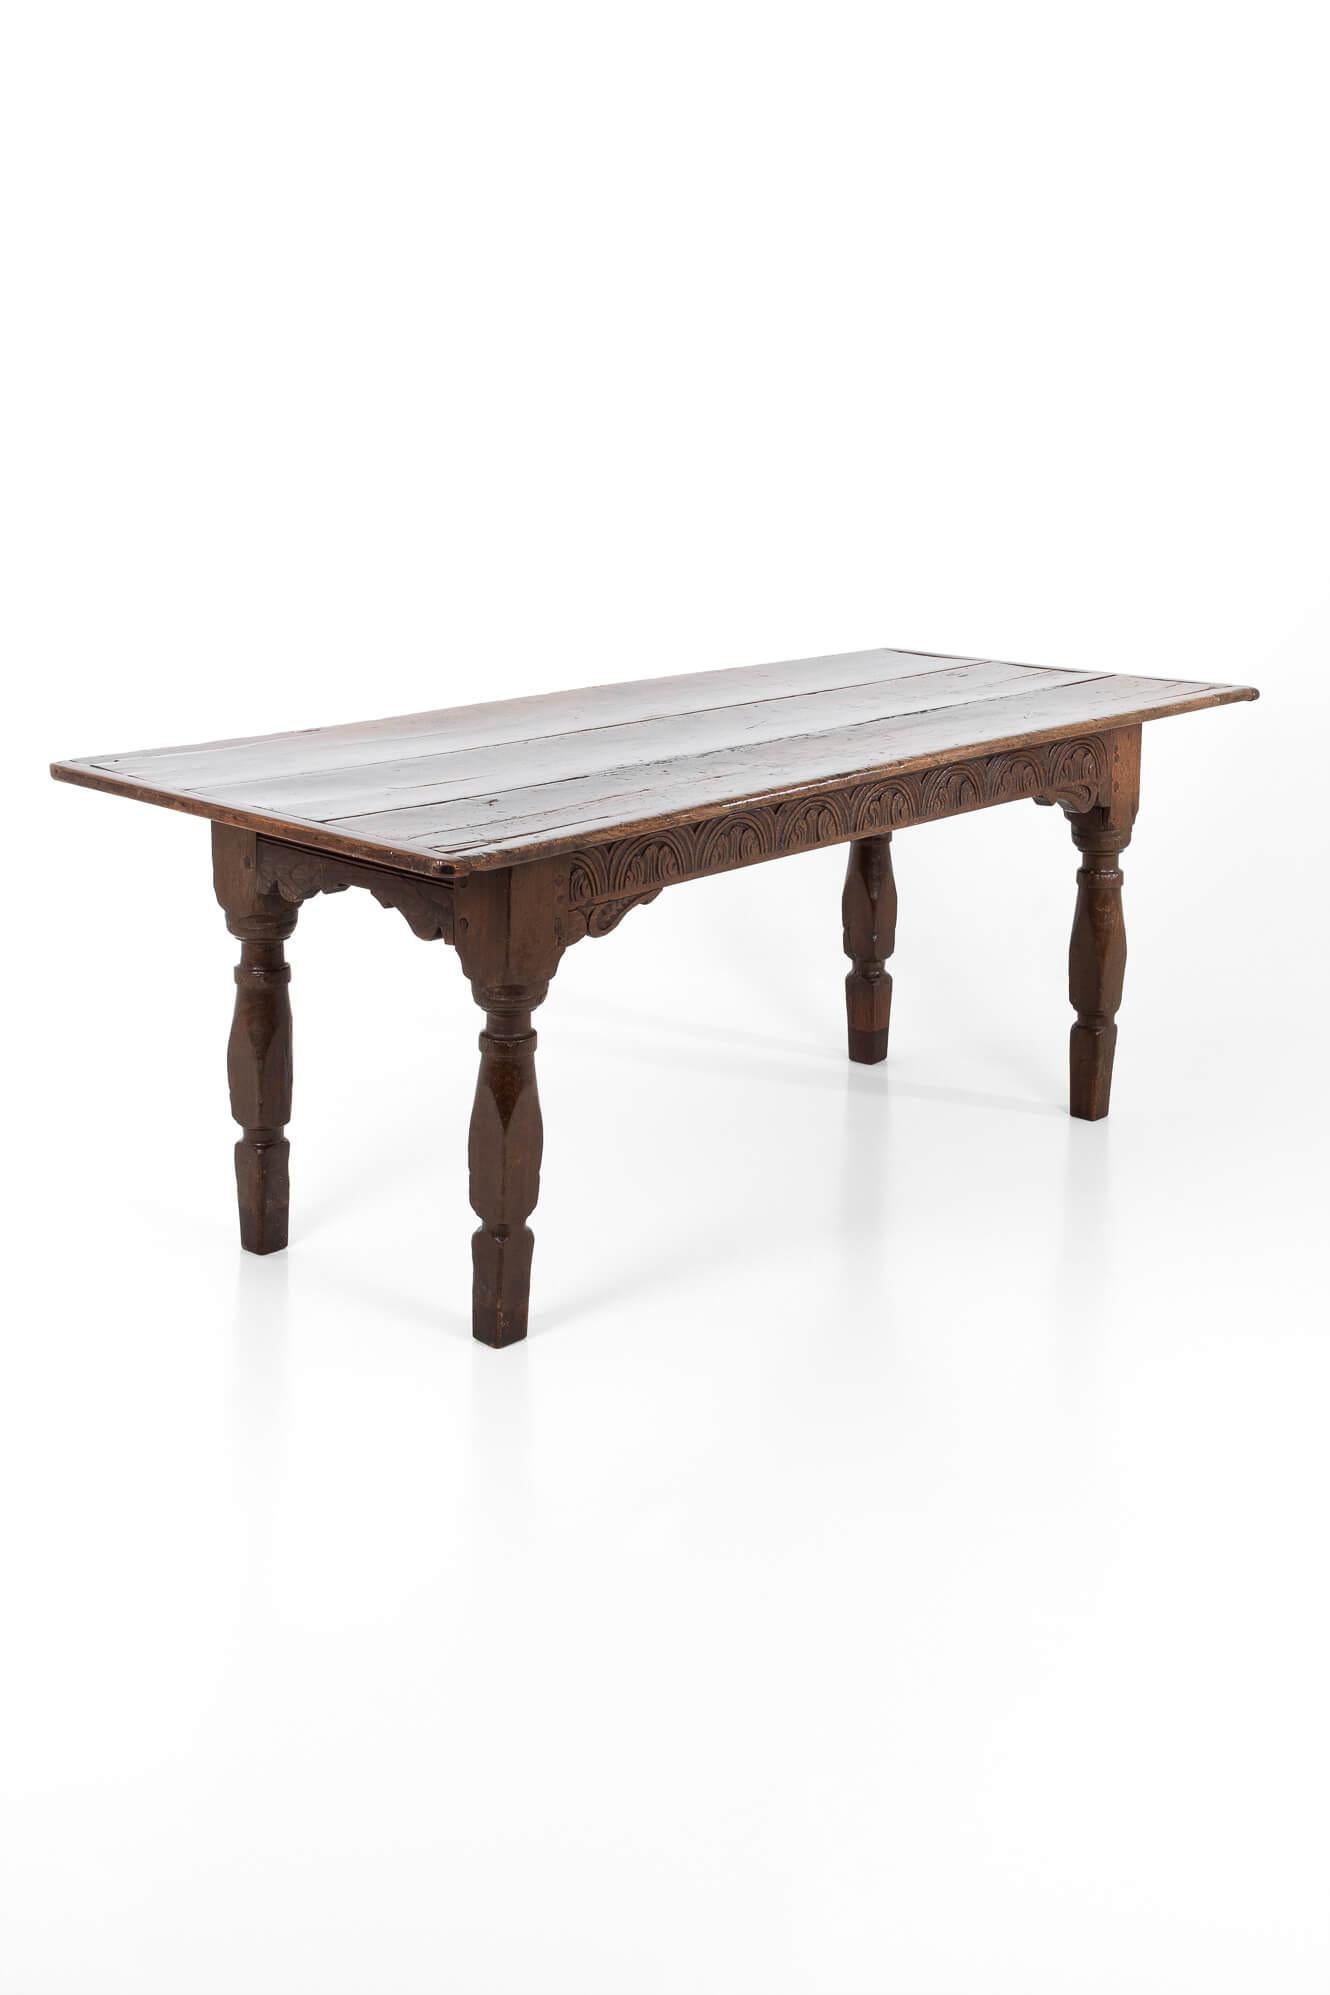 A late 17th century refectory table of rectangular form.

Featuring a three-plank top in elm, with oak cleated ends.

Oak base with molded ends and a hand-carved horizontal frieze.

Raised on the four-turned block and baluster supports.

Wonderful